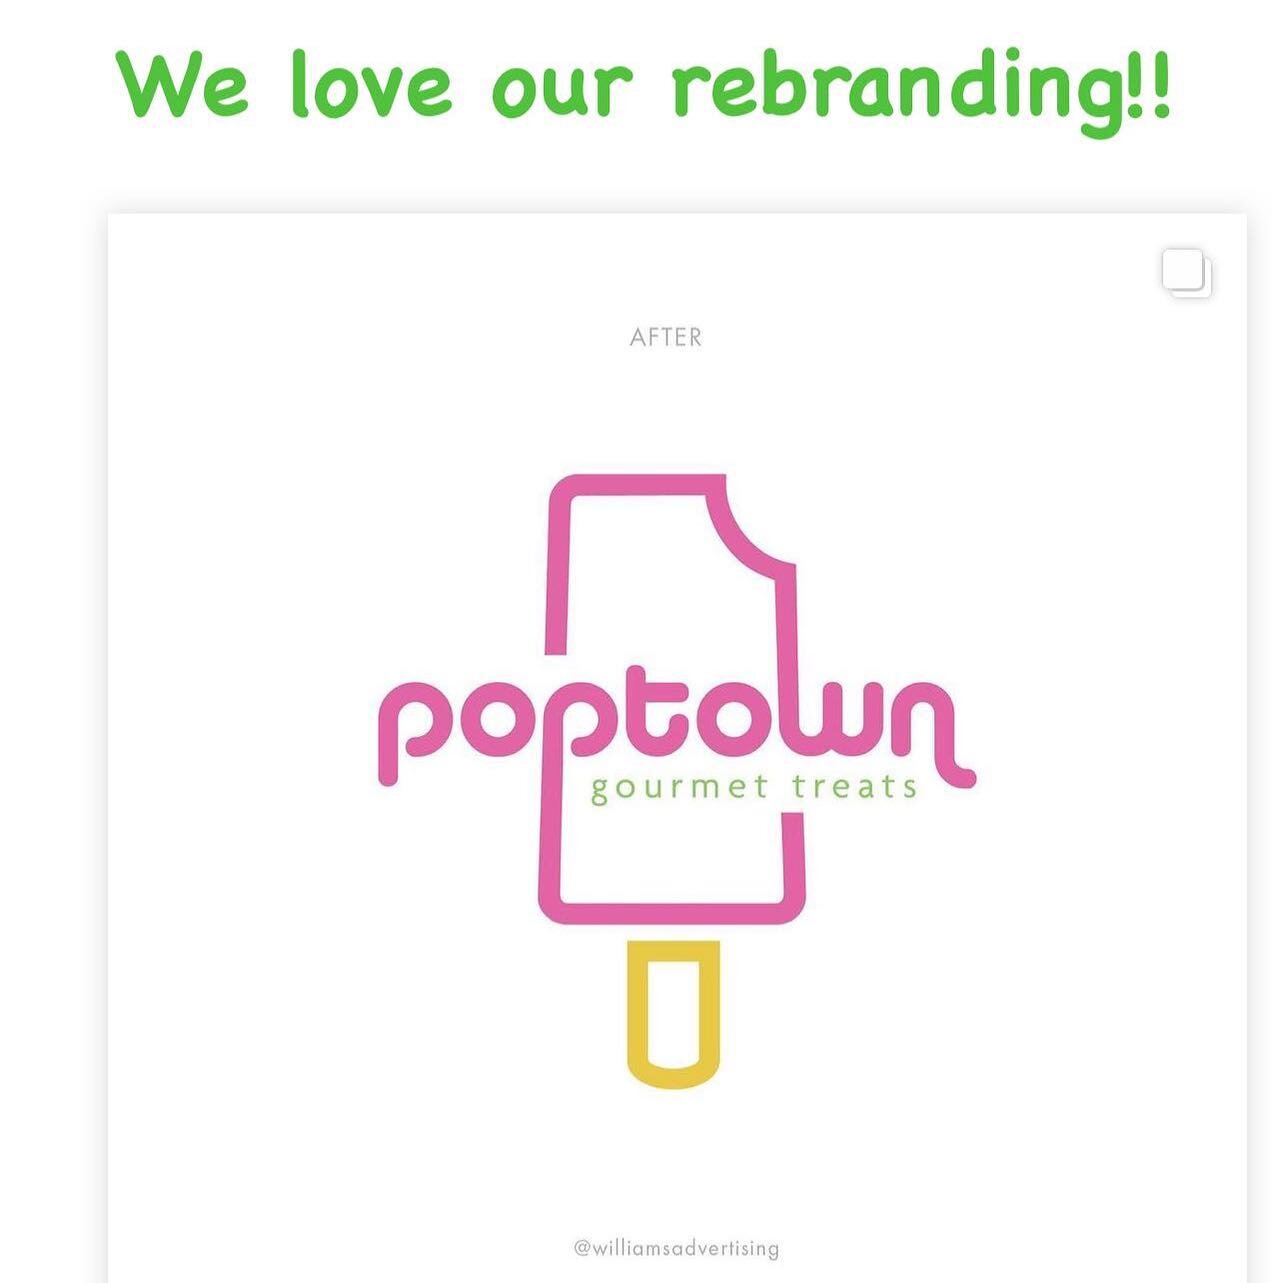 Poptown is so excited to be sharing soon our full rebrand - logo, stickers, t-shirts, truck wrap, business cards, etc - by @williamsadvertising !! 💖💚💛 They are creative in ideas, talented with designs and colors, and easy to work with!  #localbusi